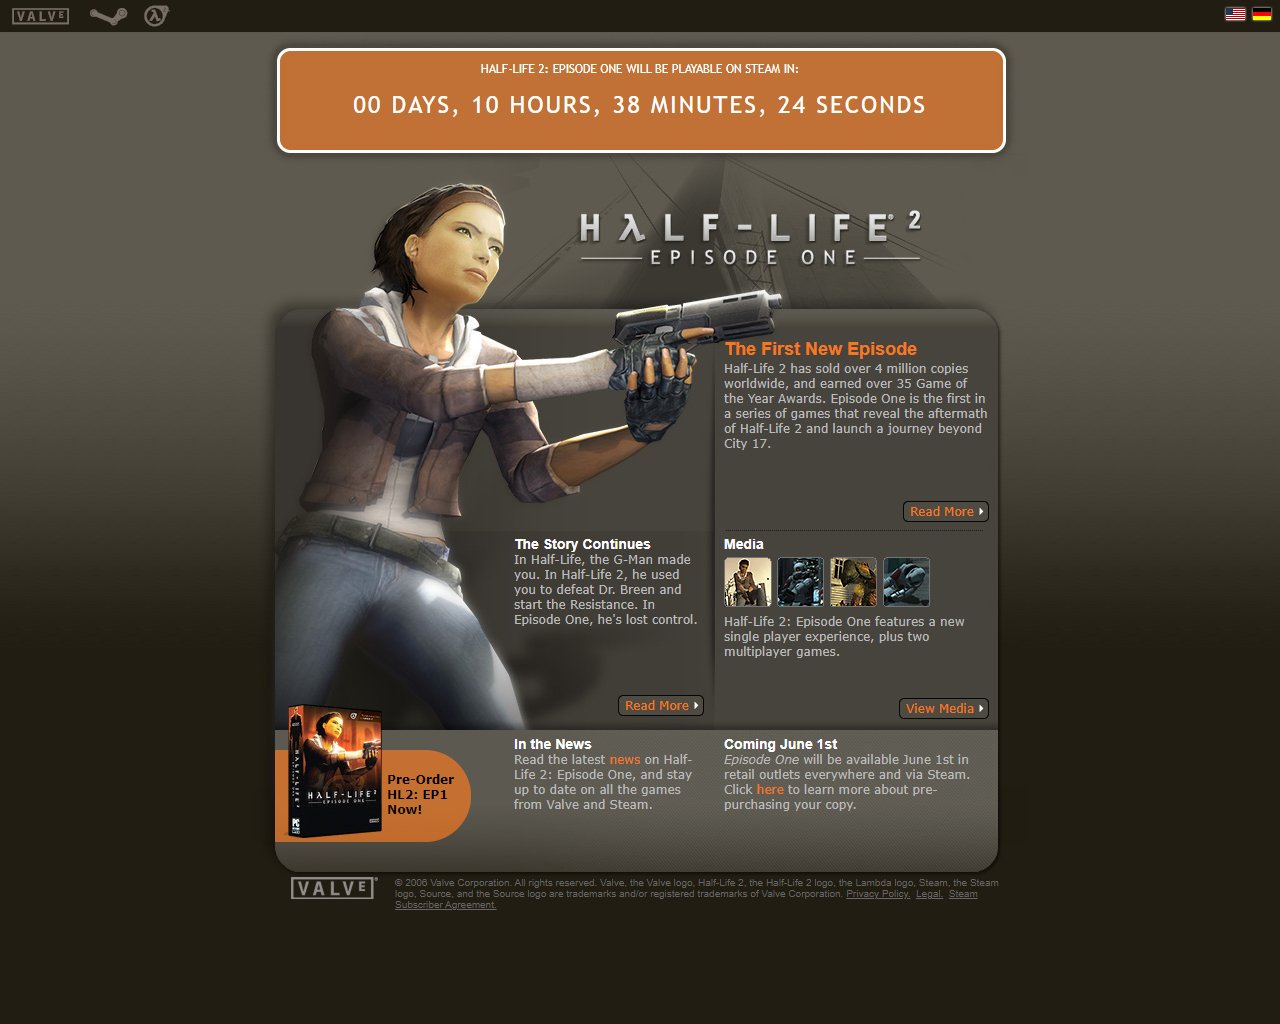 The Half-Life 2: Episode One website circa June 1, 2006 features a big orange banner on the top with a countdown to when the game will be playable on the Steam digital store.